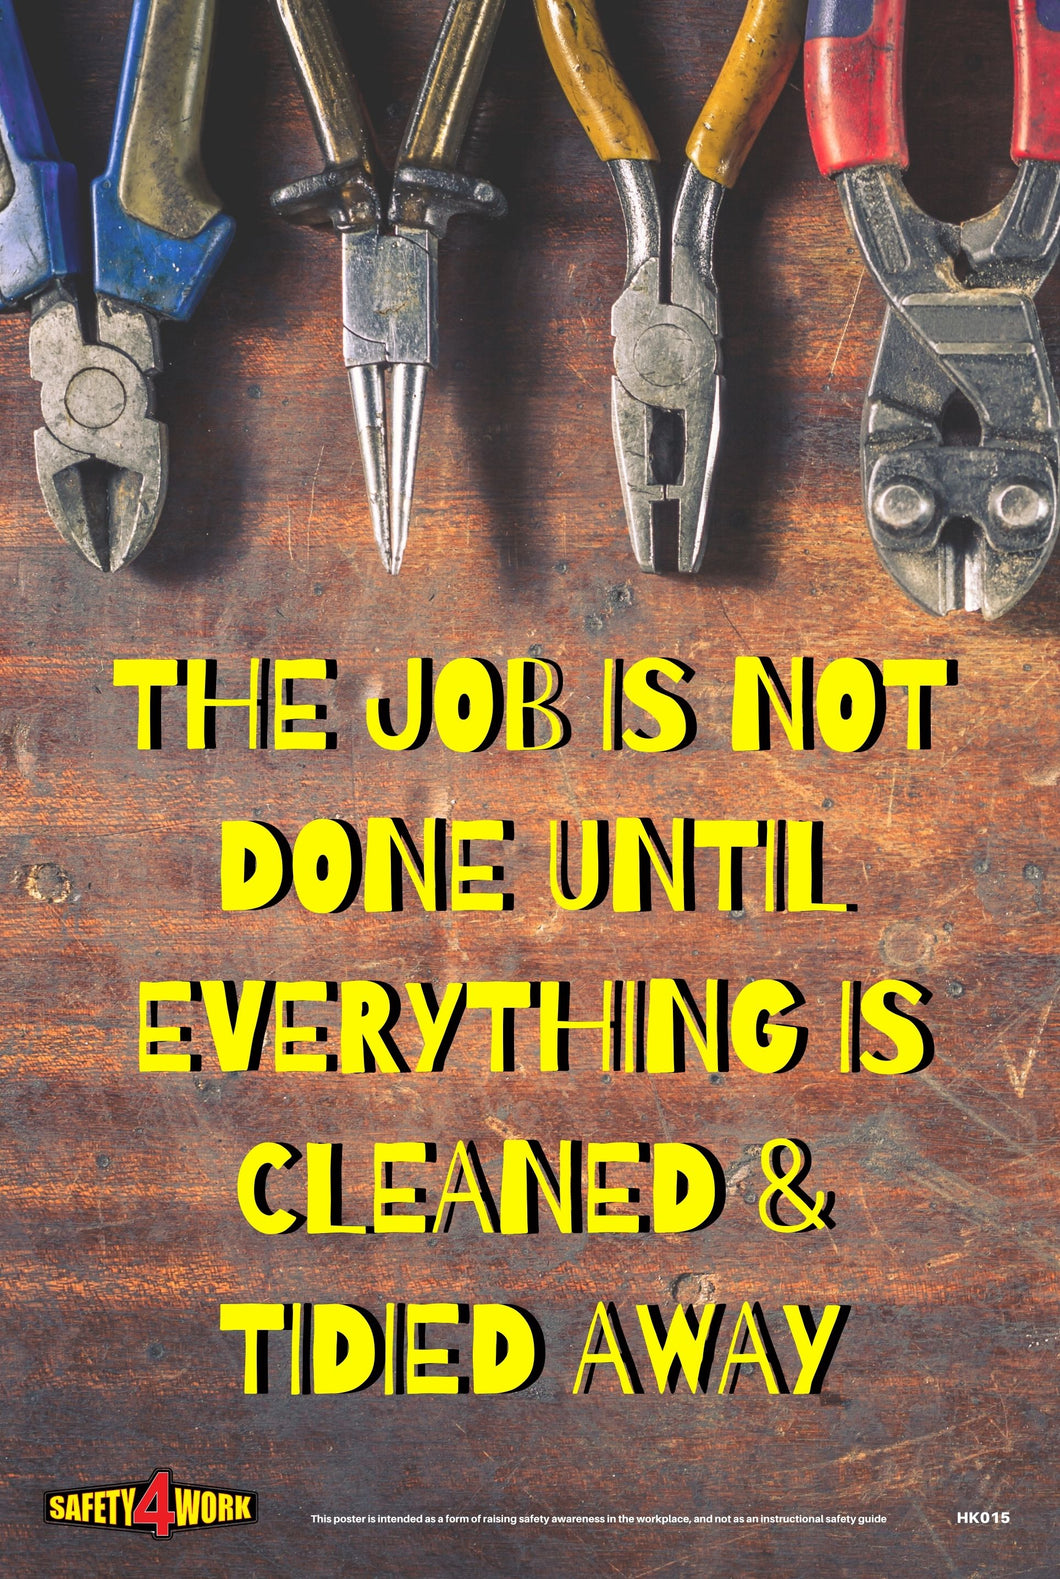 Poster, safety, housekeeping, the job is not done until everything is cleaned and tidied away, workplace